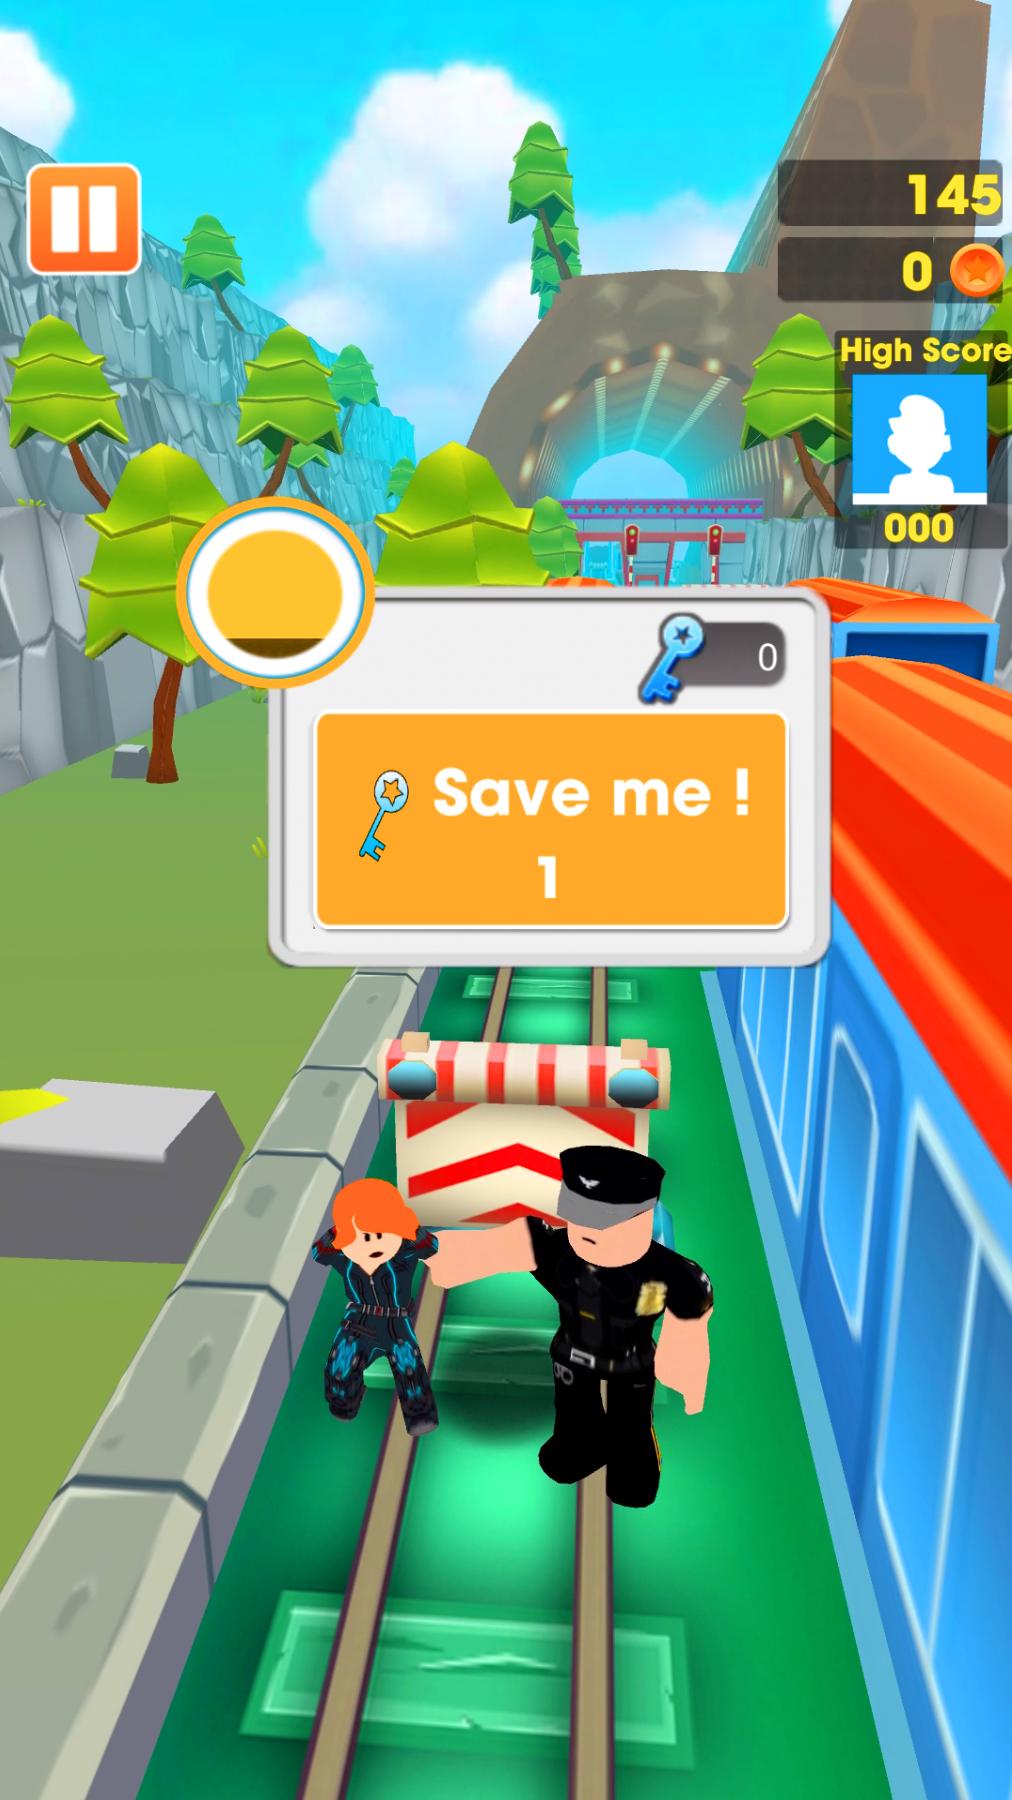 Superhero Tycoon For Android Apk Download - roblox 4 player super hero tycoon roblox tycoon roleplay